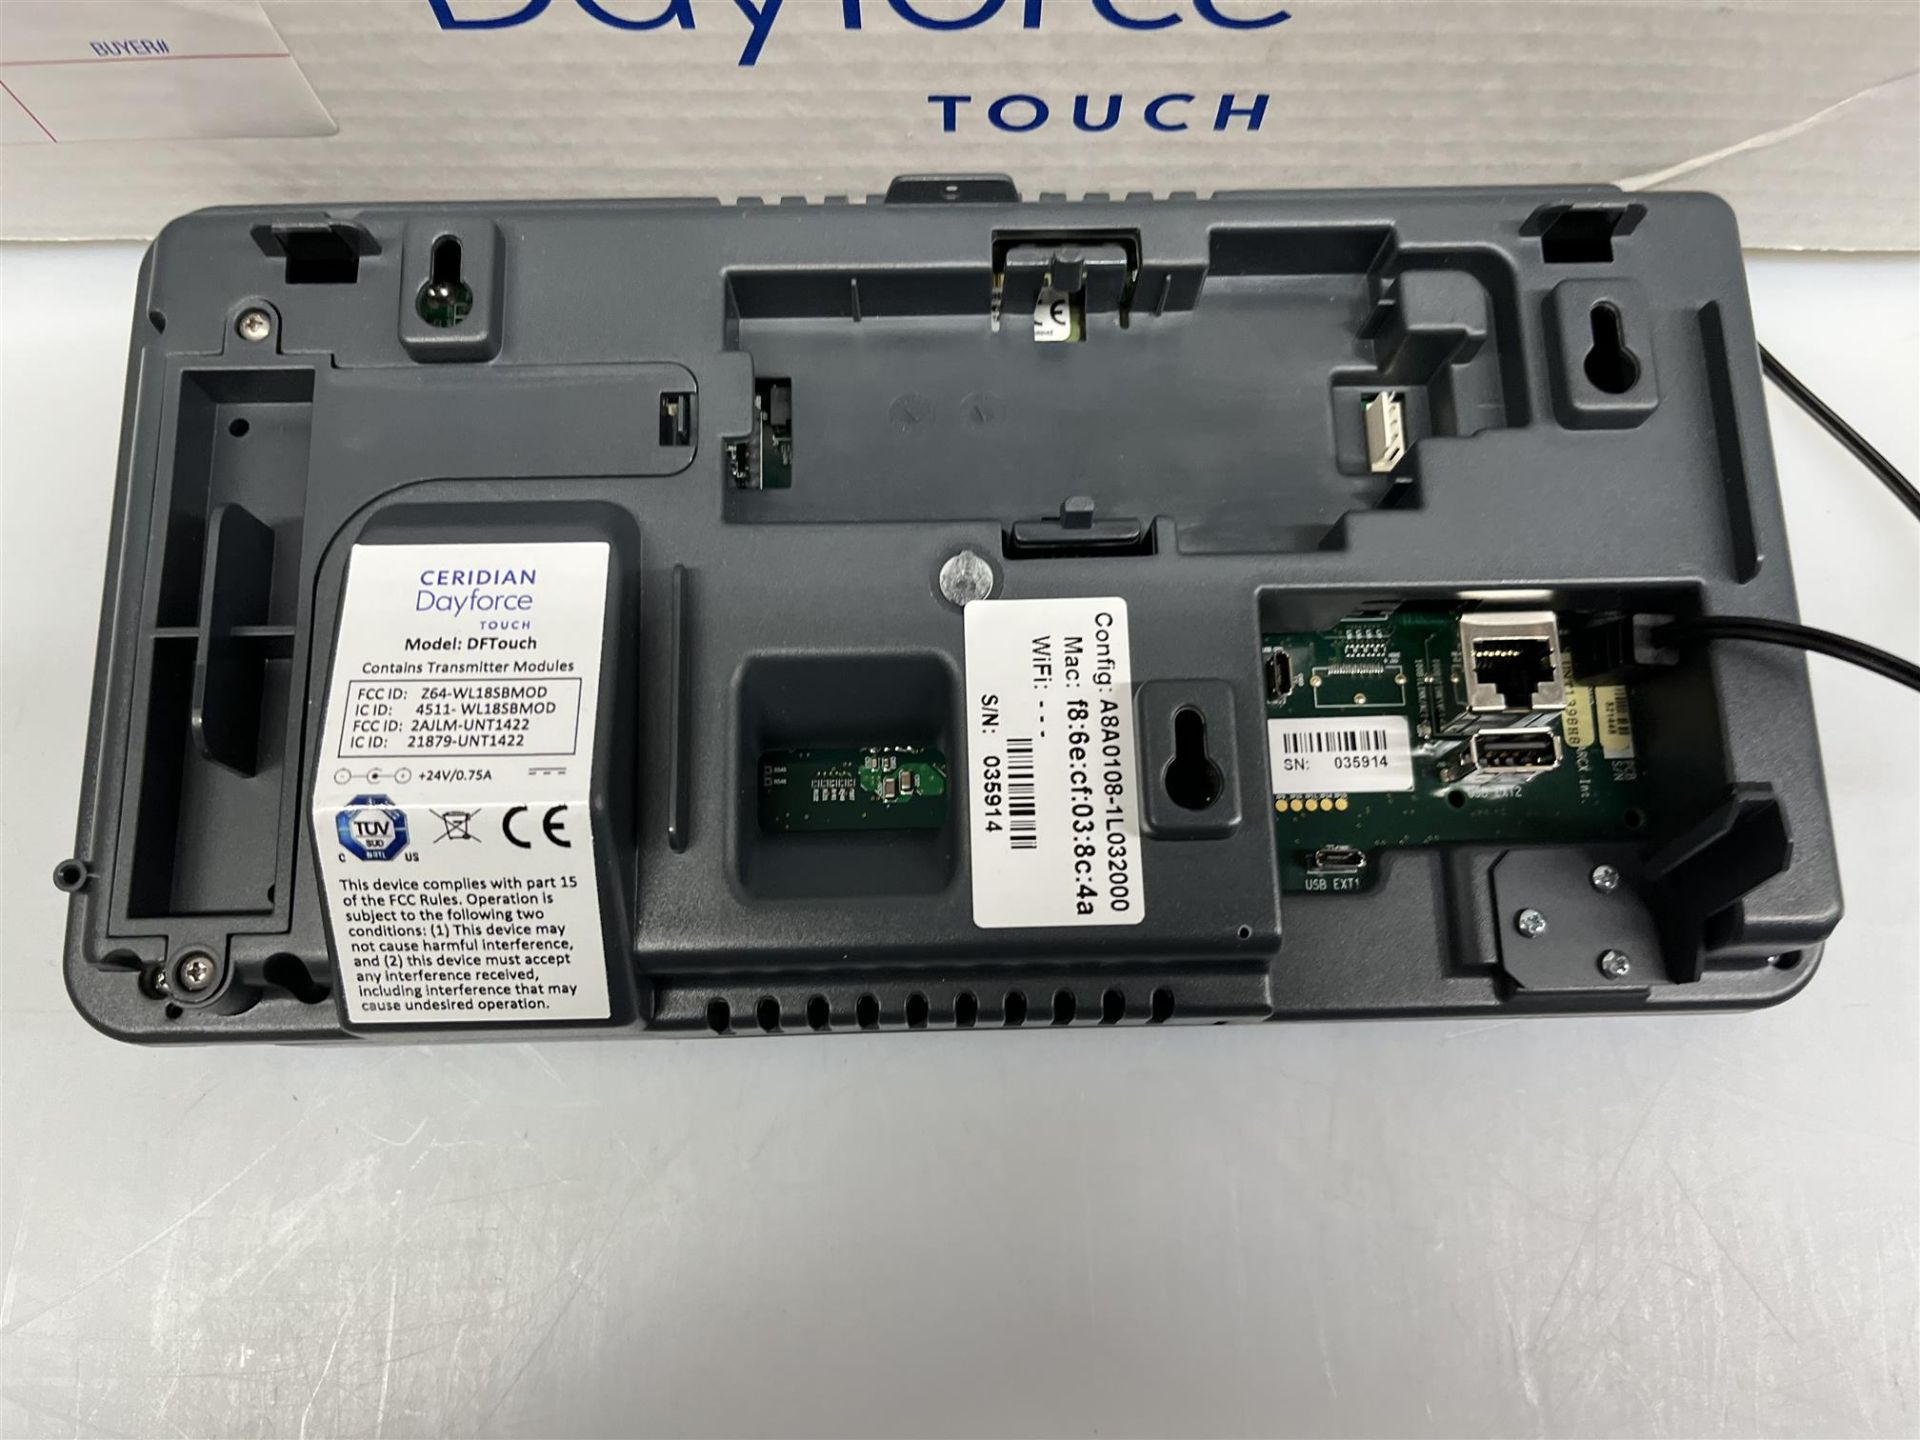 Ceridian Dayforce Touch - Emplyee touch punch in tracker - Mo#: DFTouch - Image 2 of 3